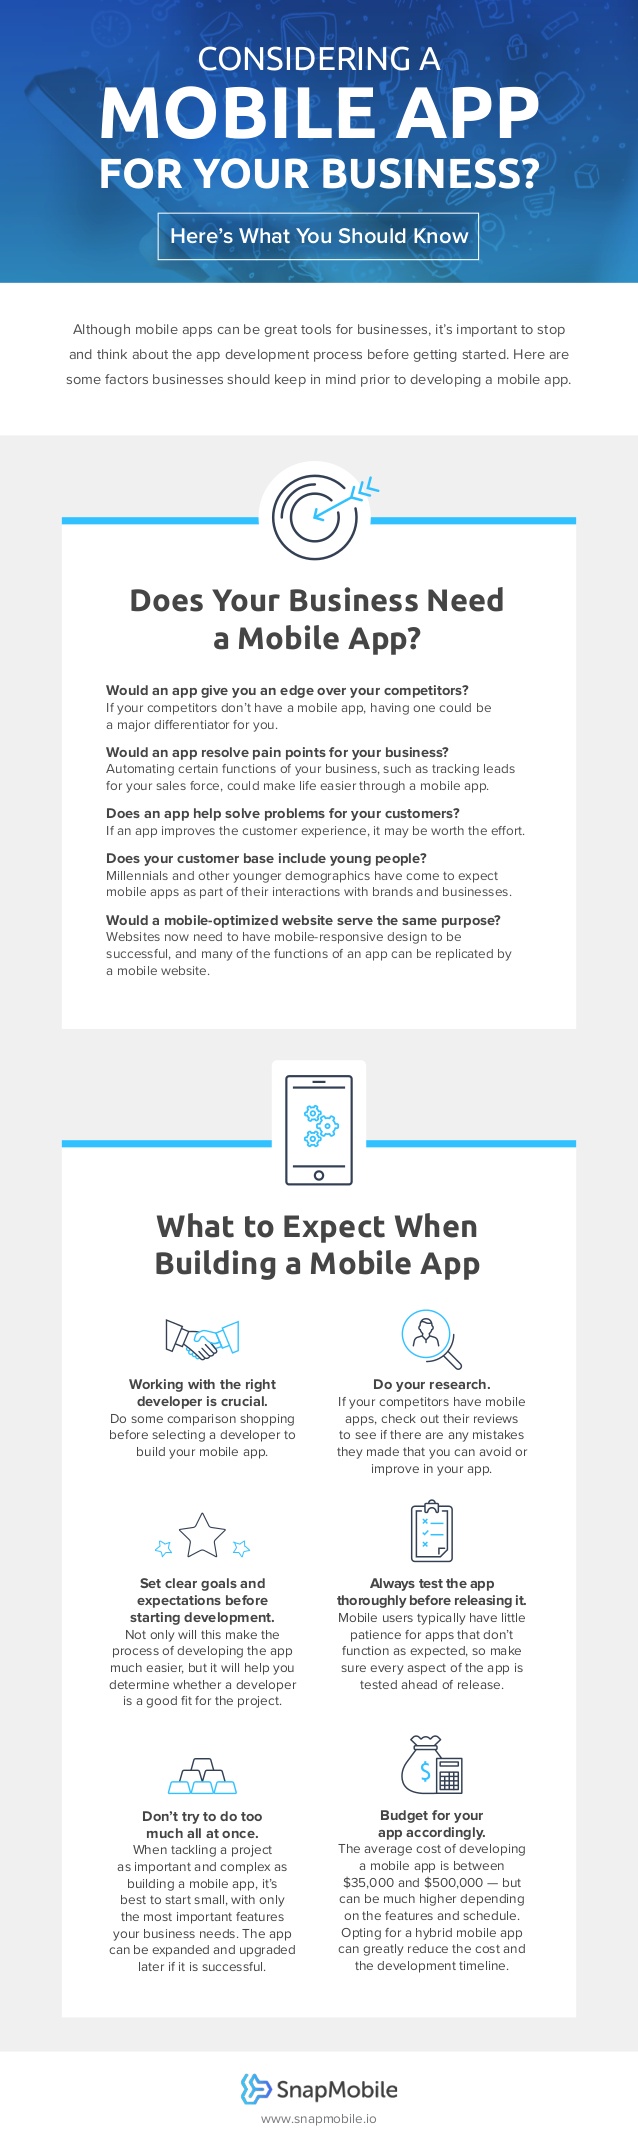 Considering A Mobile App For Your Business? - Image 1